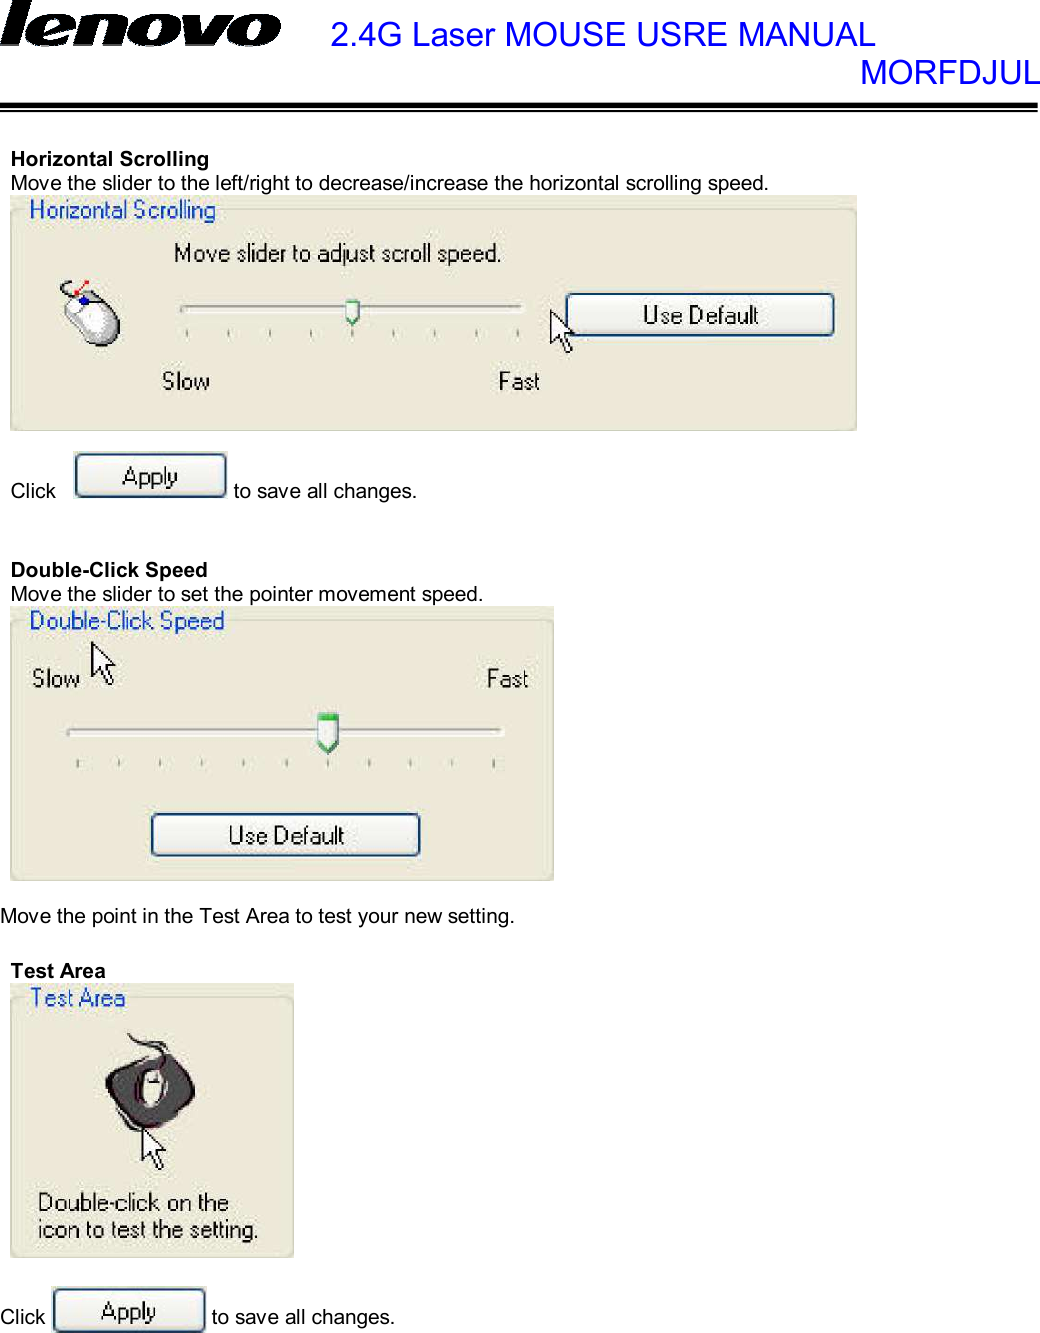    2.4G Laser MOUSE USRE MANUAL            MORFDJUL       Horizontal Scrolling Move the slider to the left/right to decrease/increase the horizontal scrolling speed.    Click  to save all changes.   Double-Click Speed Move the slider to set the pointer movement speed.   Move the point in the Test Area to test your new setting.  Test Area    Click  to save all changes. 